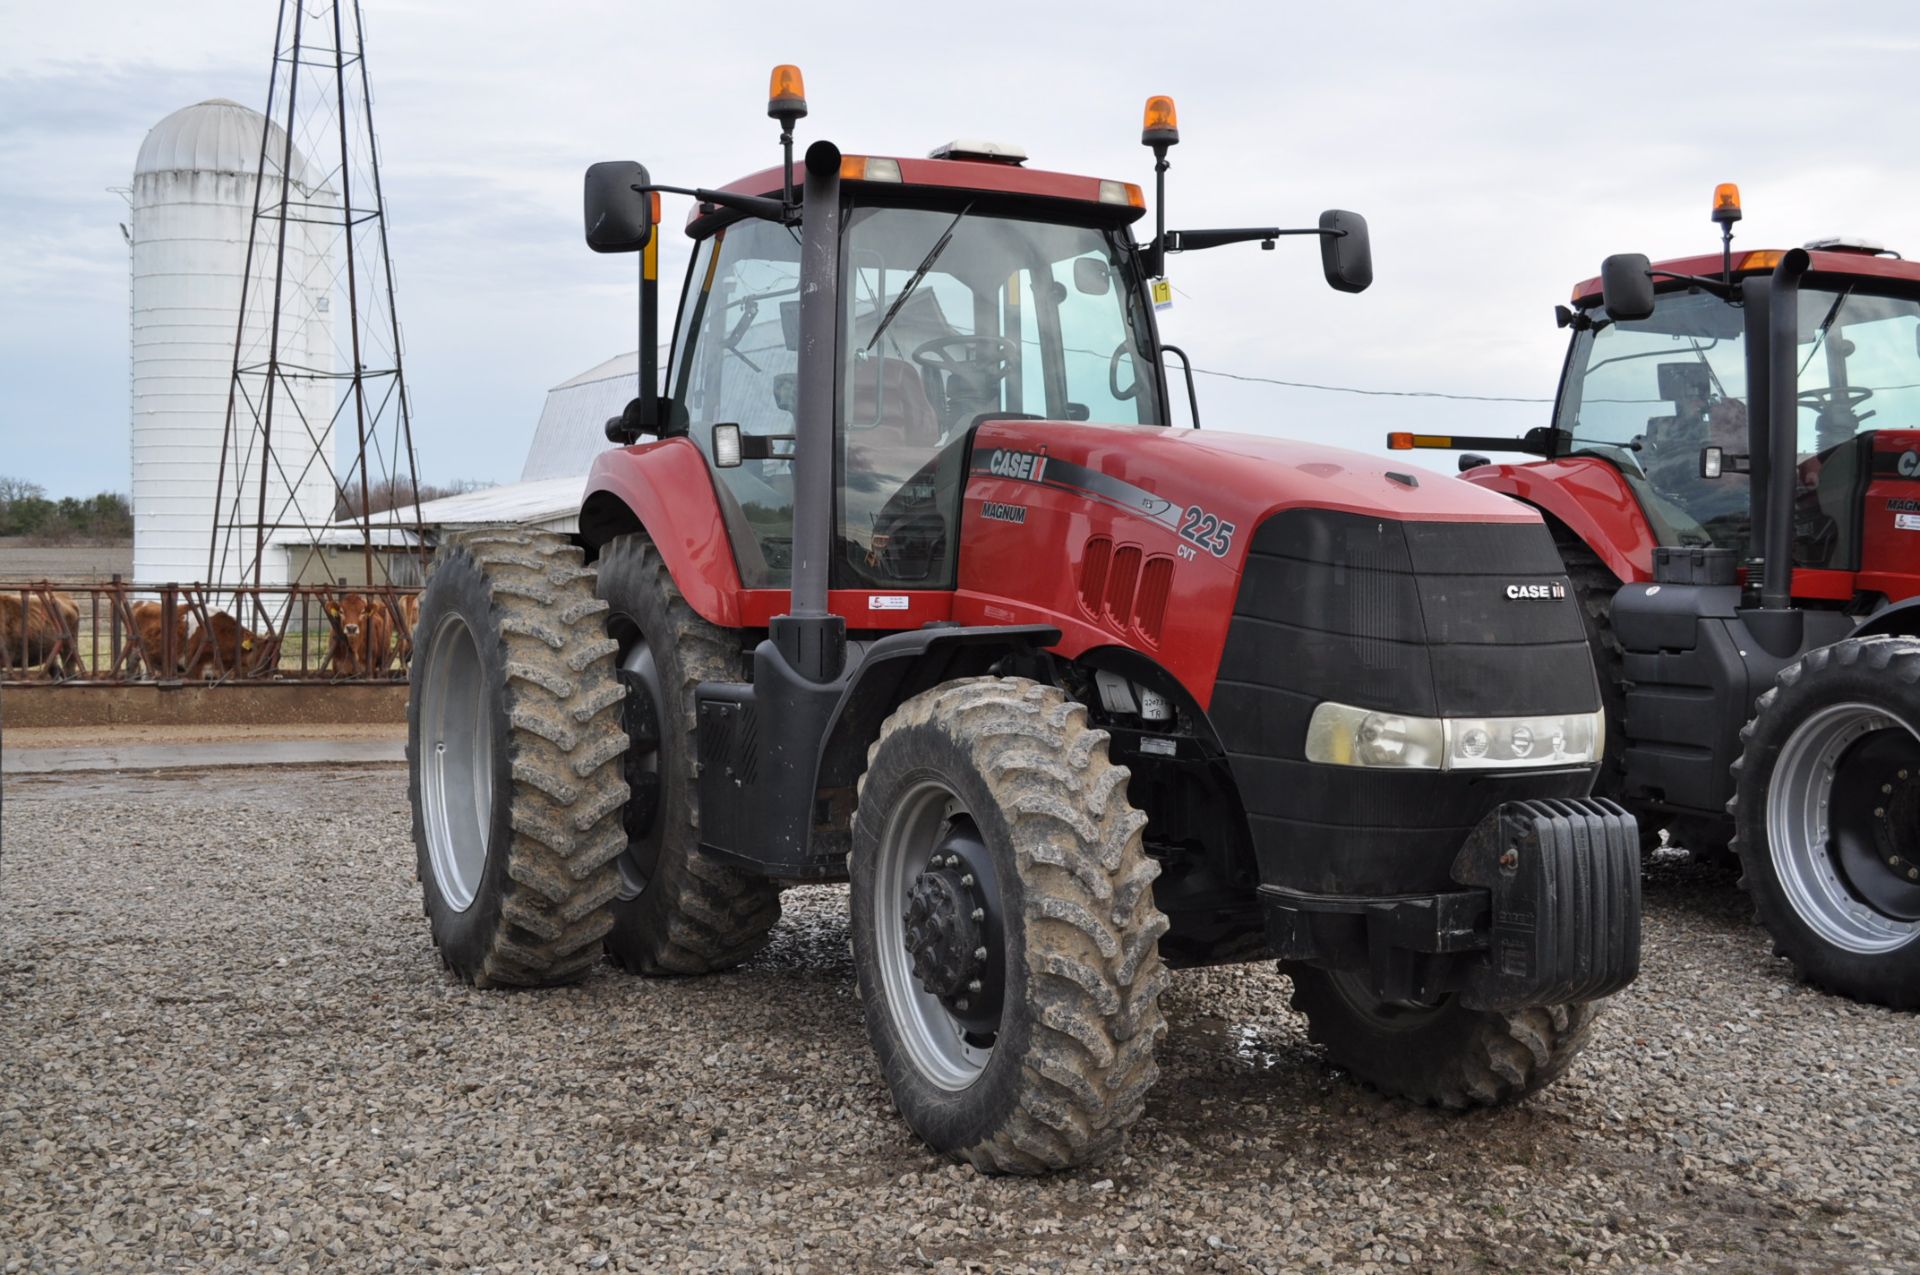 Case IH Magnum 225 tractor, MFWD, 480/80 R 46 duals, 380/85 R 34 front, CVT, 4 hyd remotes, 540/1000 - Image 4 of 27